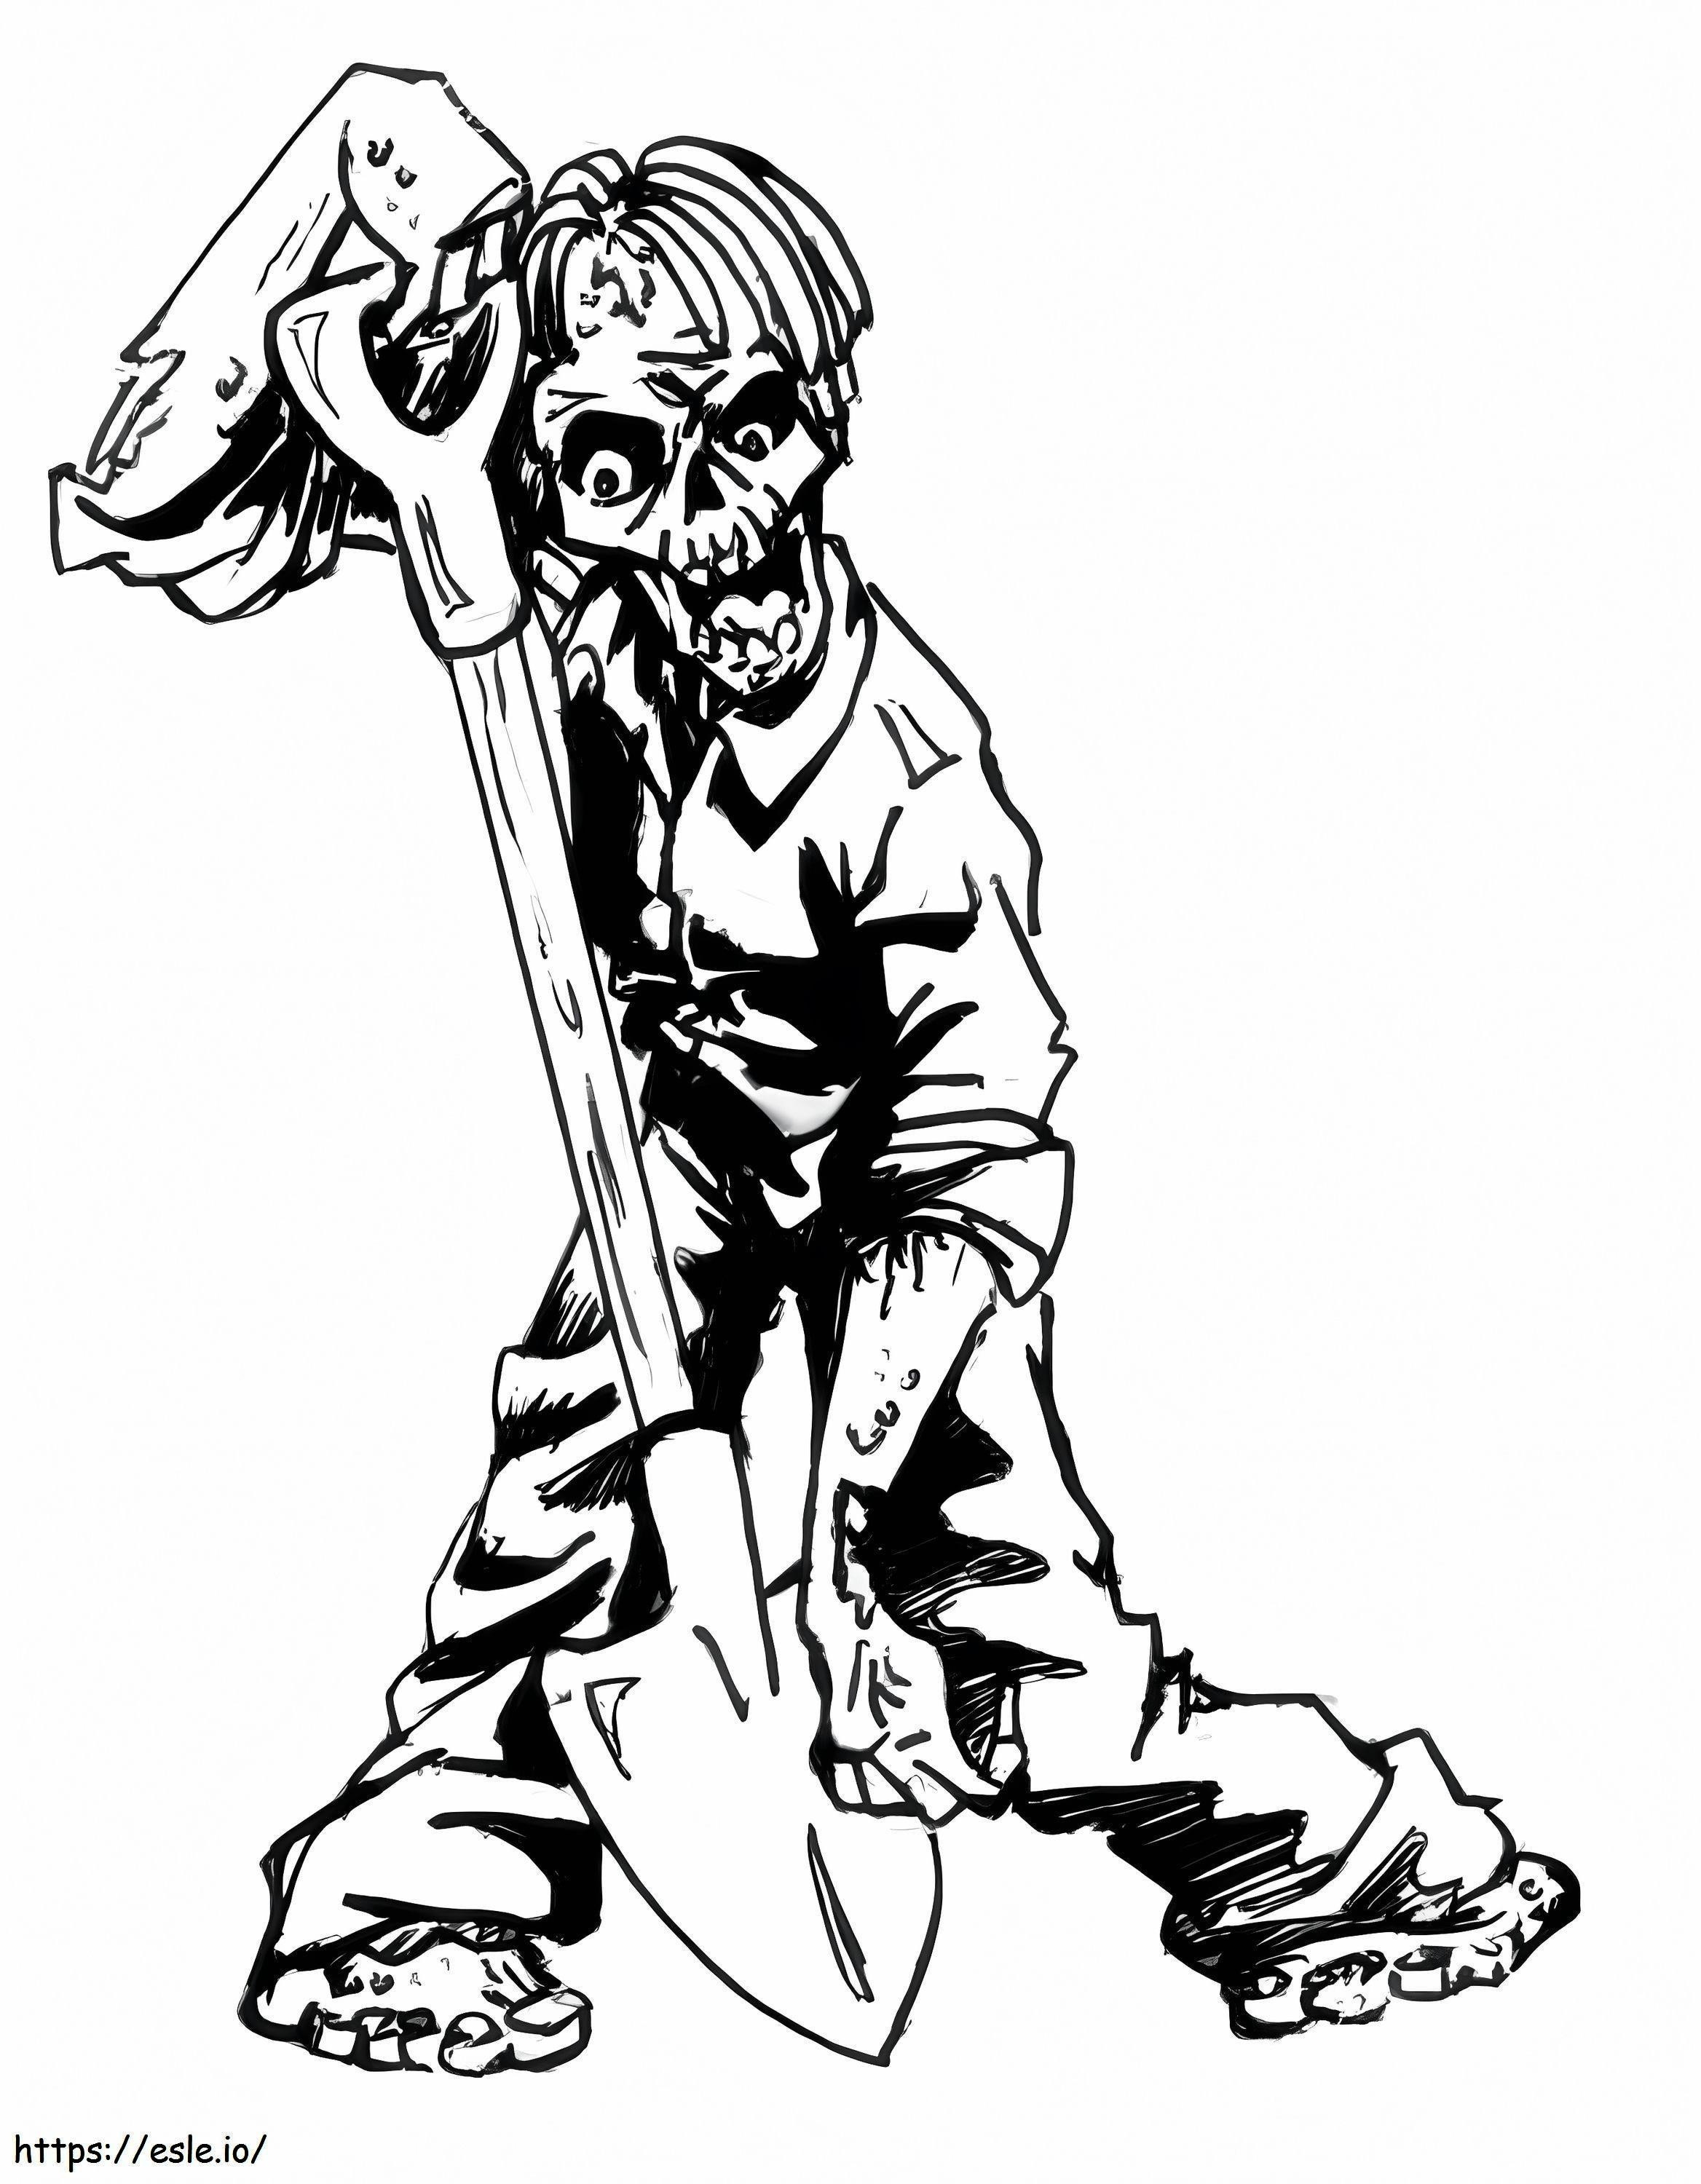 Undead Holding A Shovel coloring page